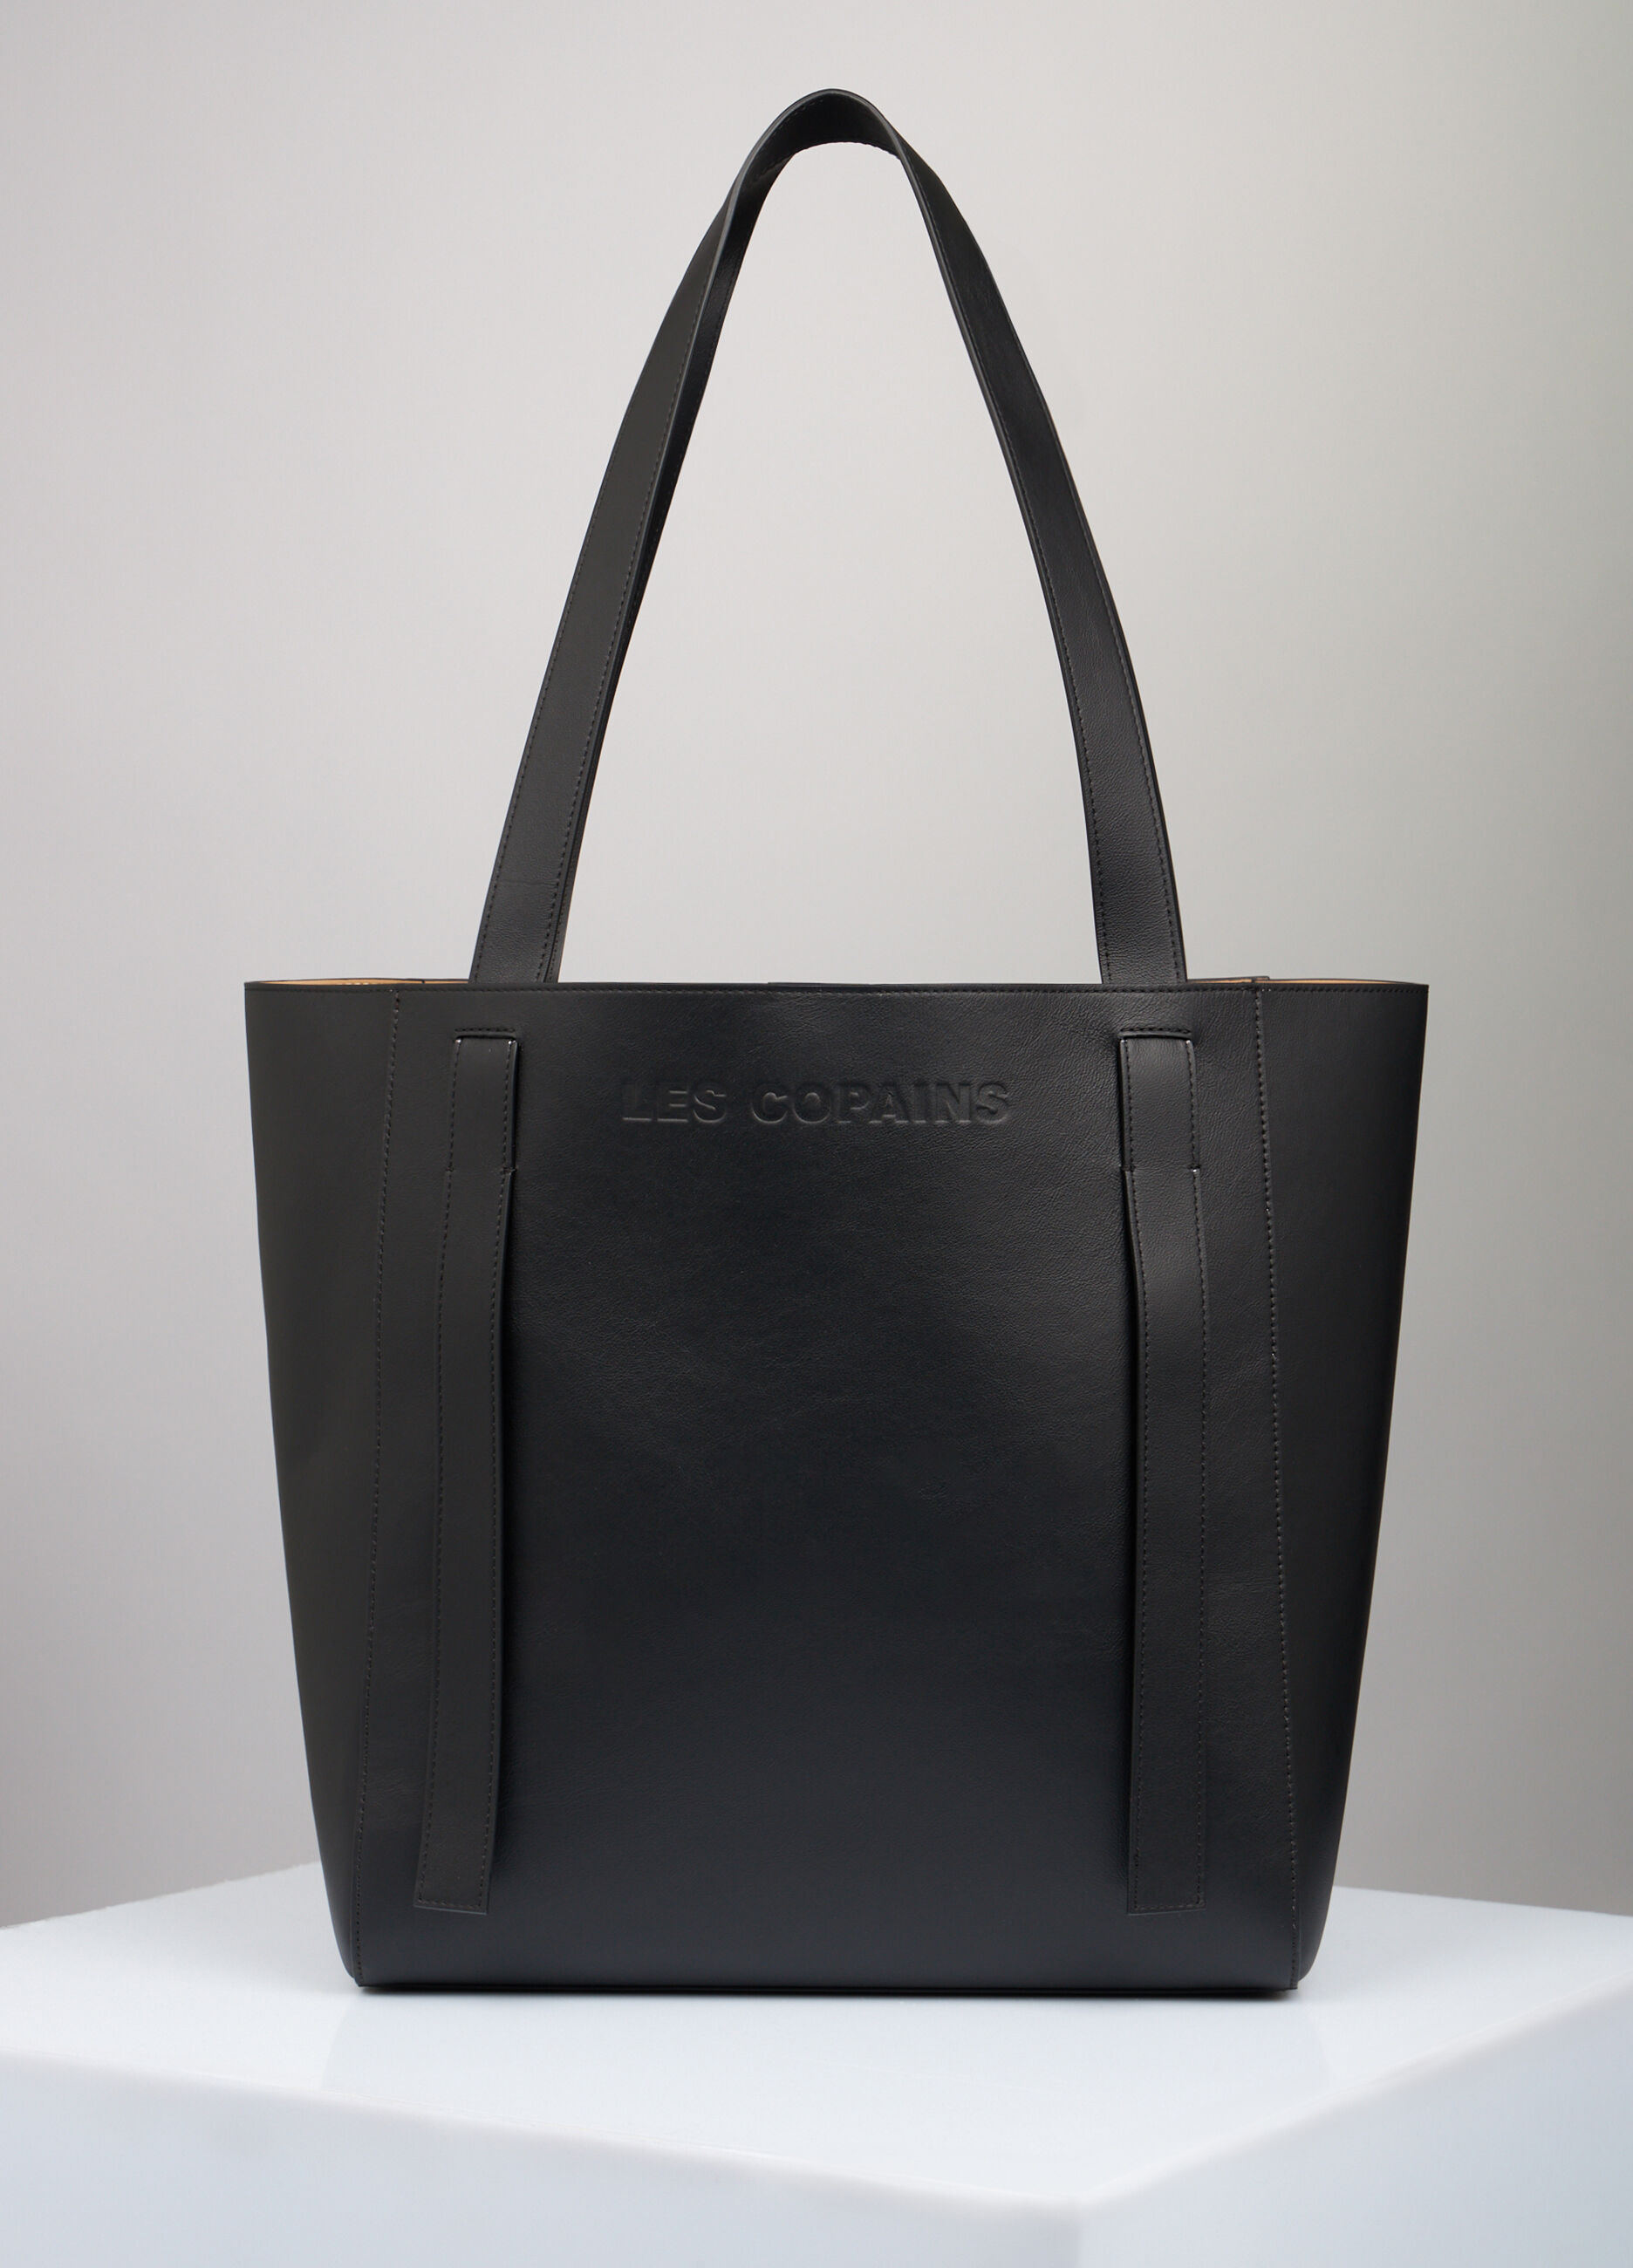 Real leather tote bag